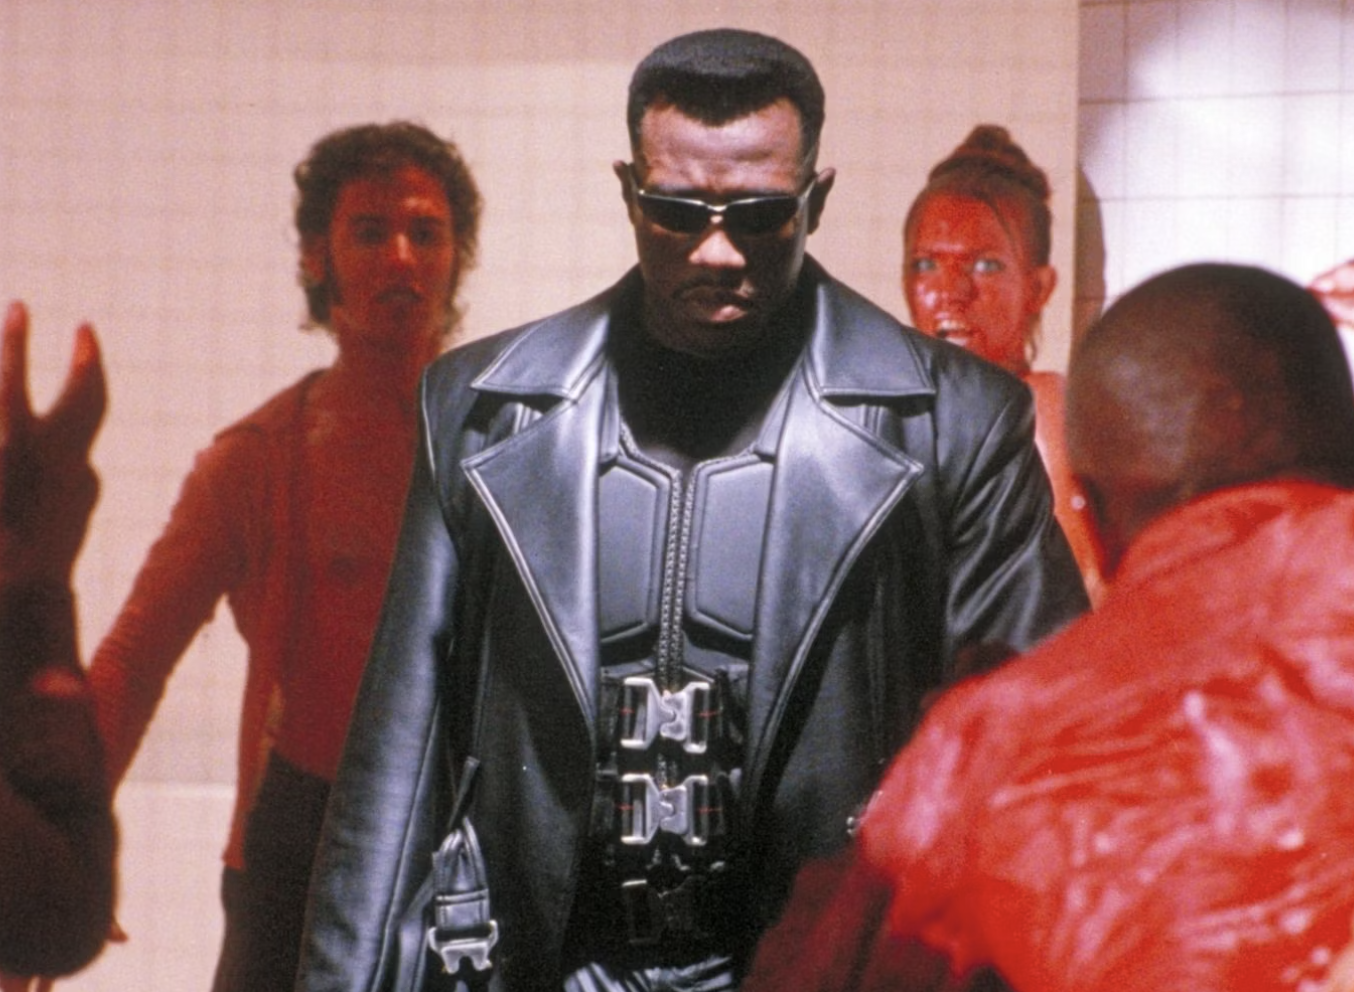 “BLADE III for sure... Wesley Snipes smoked weed all day, tried to strangle David Goyer, Goyer bringing in bikers as his 'security', main star and director only communicating through post it notes…”